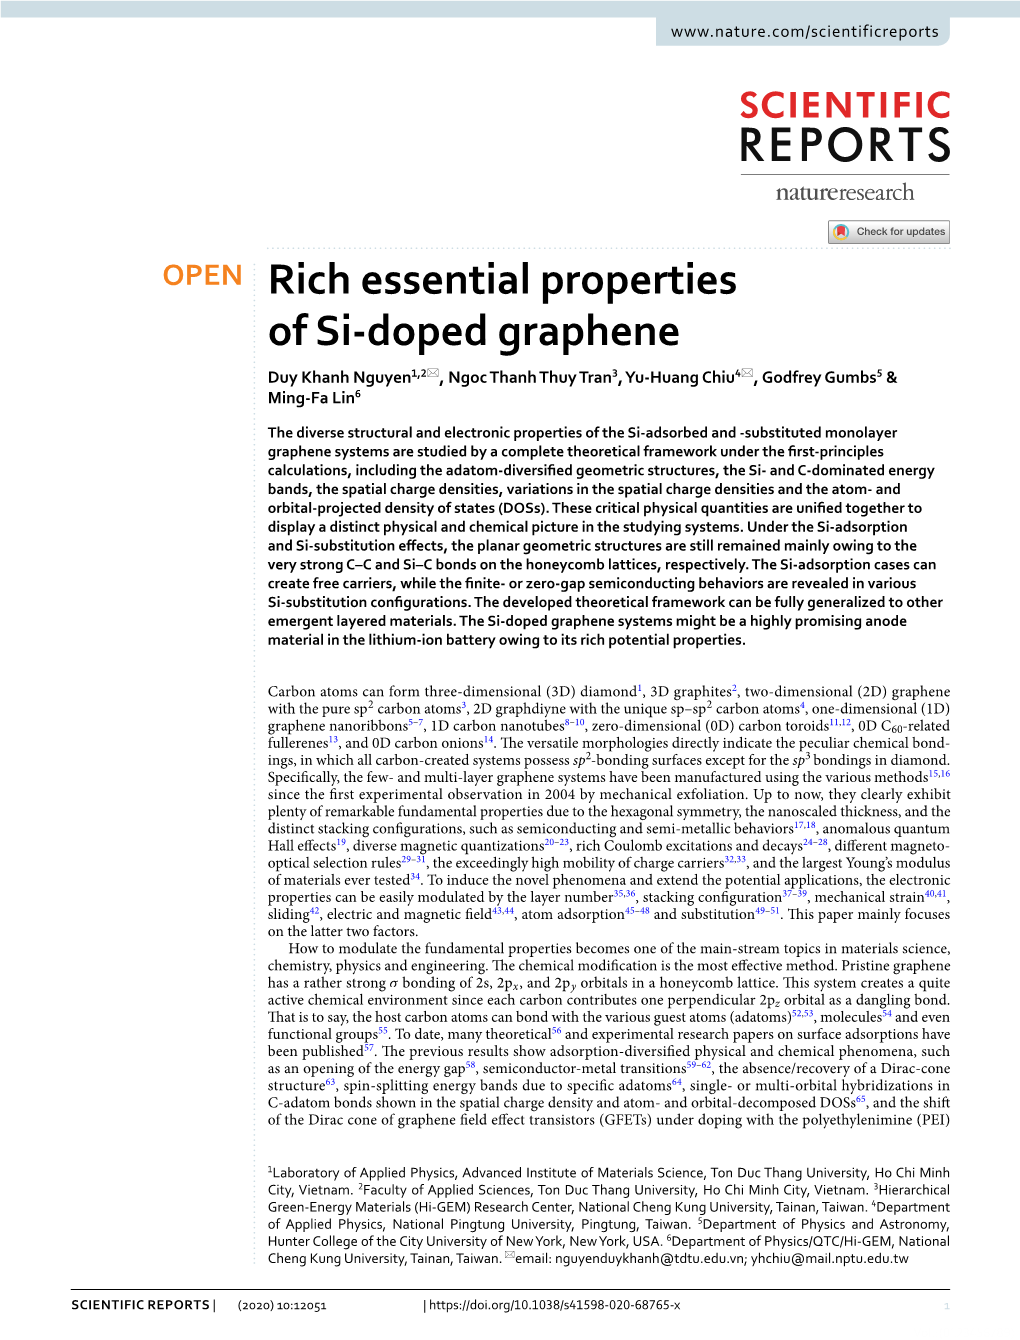 Rich Essential Properties of Si-Doped Graphene